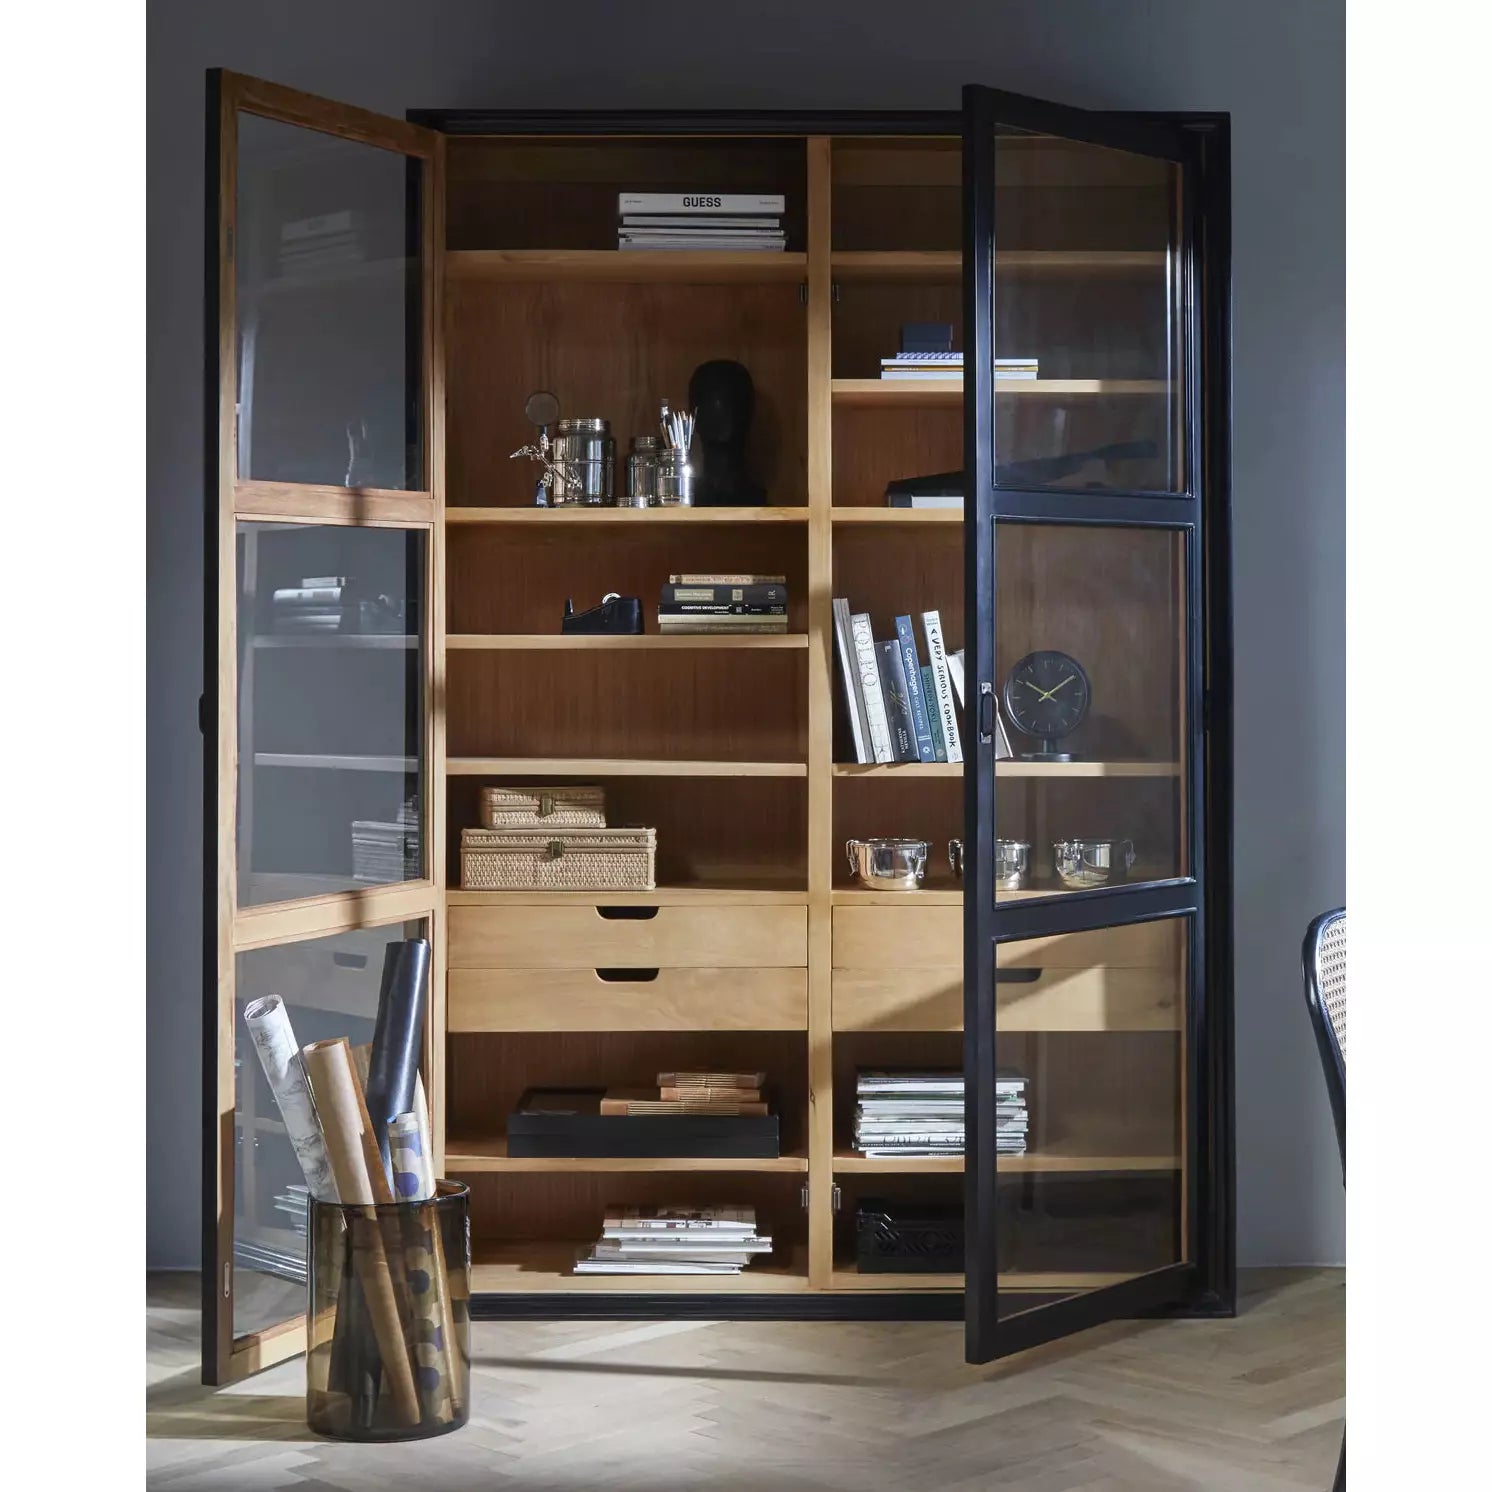 Nordal Viva Storage Cabinet Black With Glass Doors Drawers Mahogany Wood